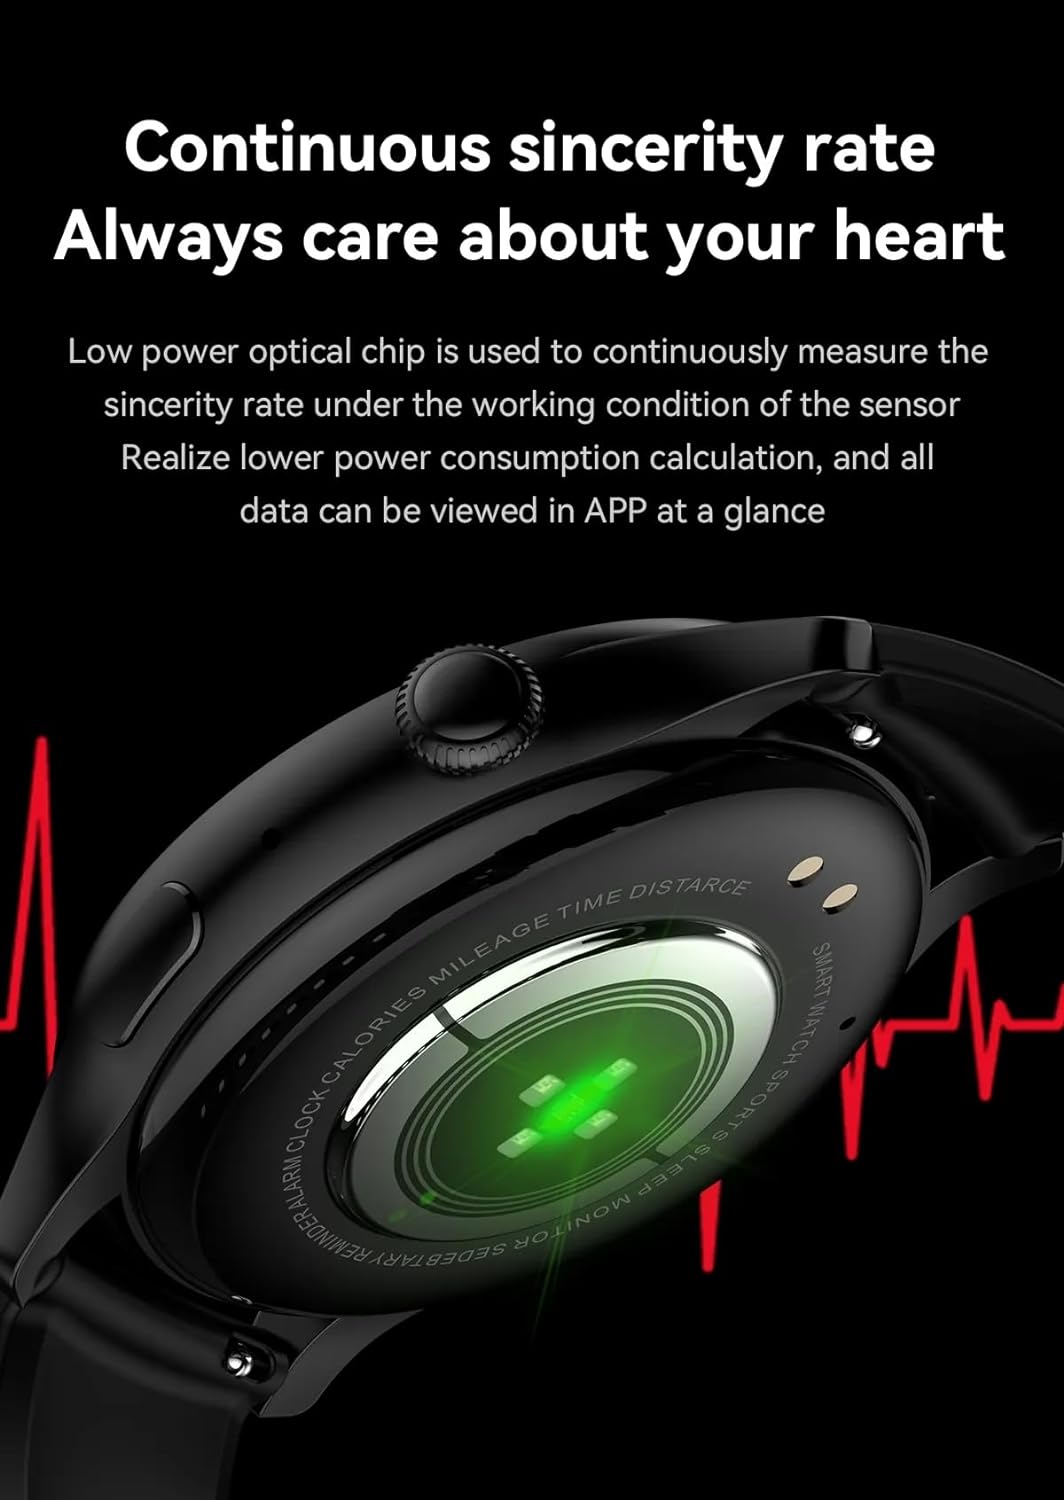 BelGear Smart Watch for Men Women,IP68 Waterproof Pedometer 1.43'' HD Outdoor Sport Fitness Tracker Watch with Heart Rate/Blood Oxygen/Sleep Monitor, Compatible with iOS Android Phones (black)